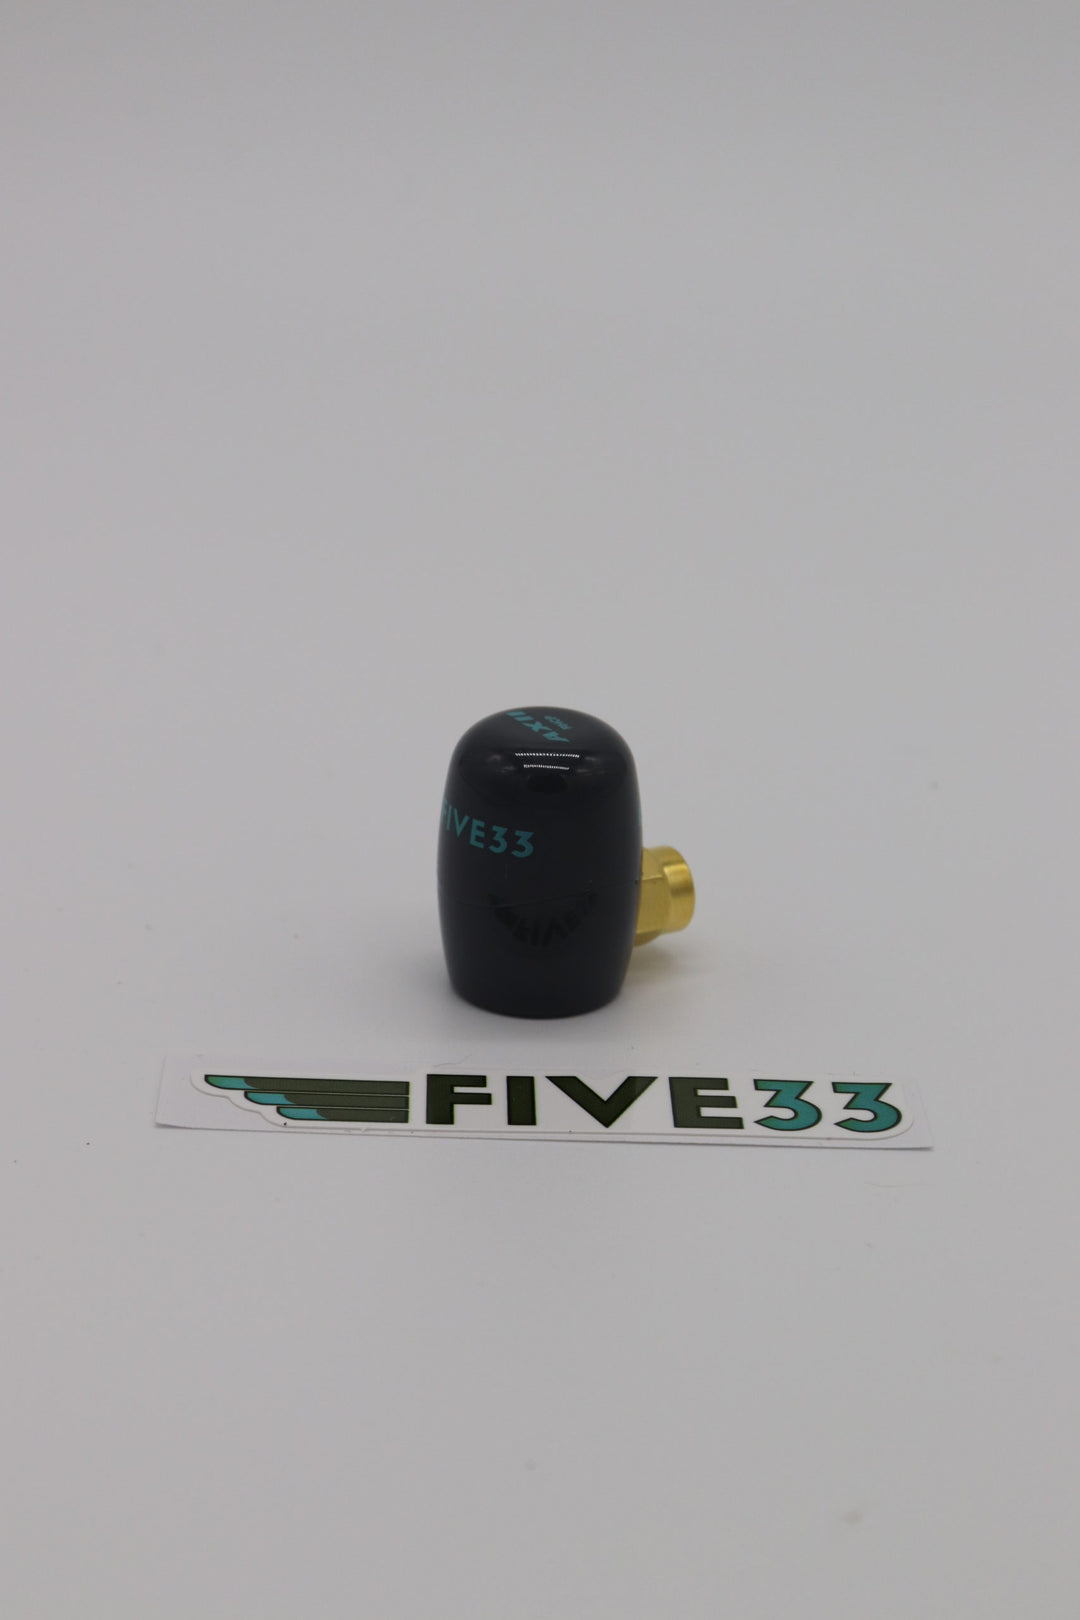 Five33 AXII 2 Right Angle Stubby 5.8GHz Antenna